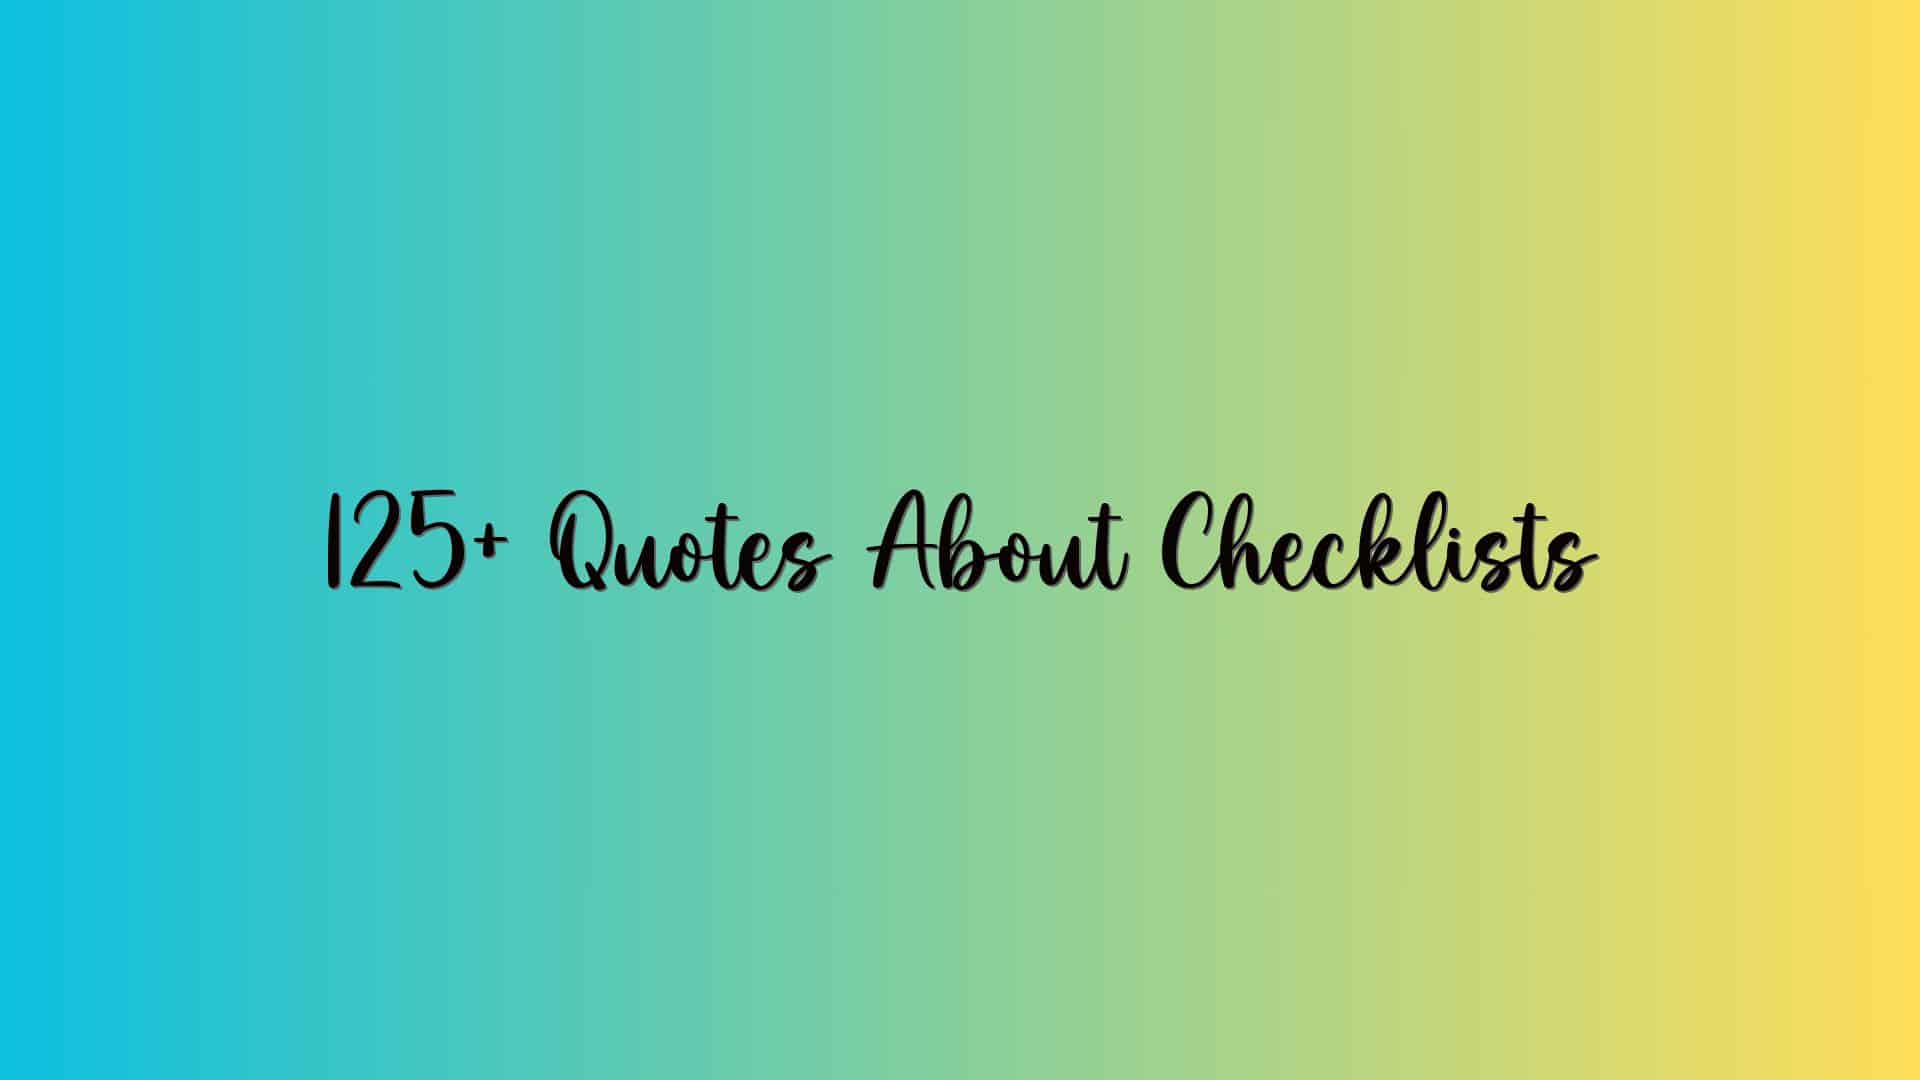 125+ Quotes About Checklists